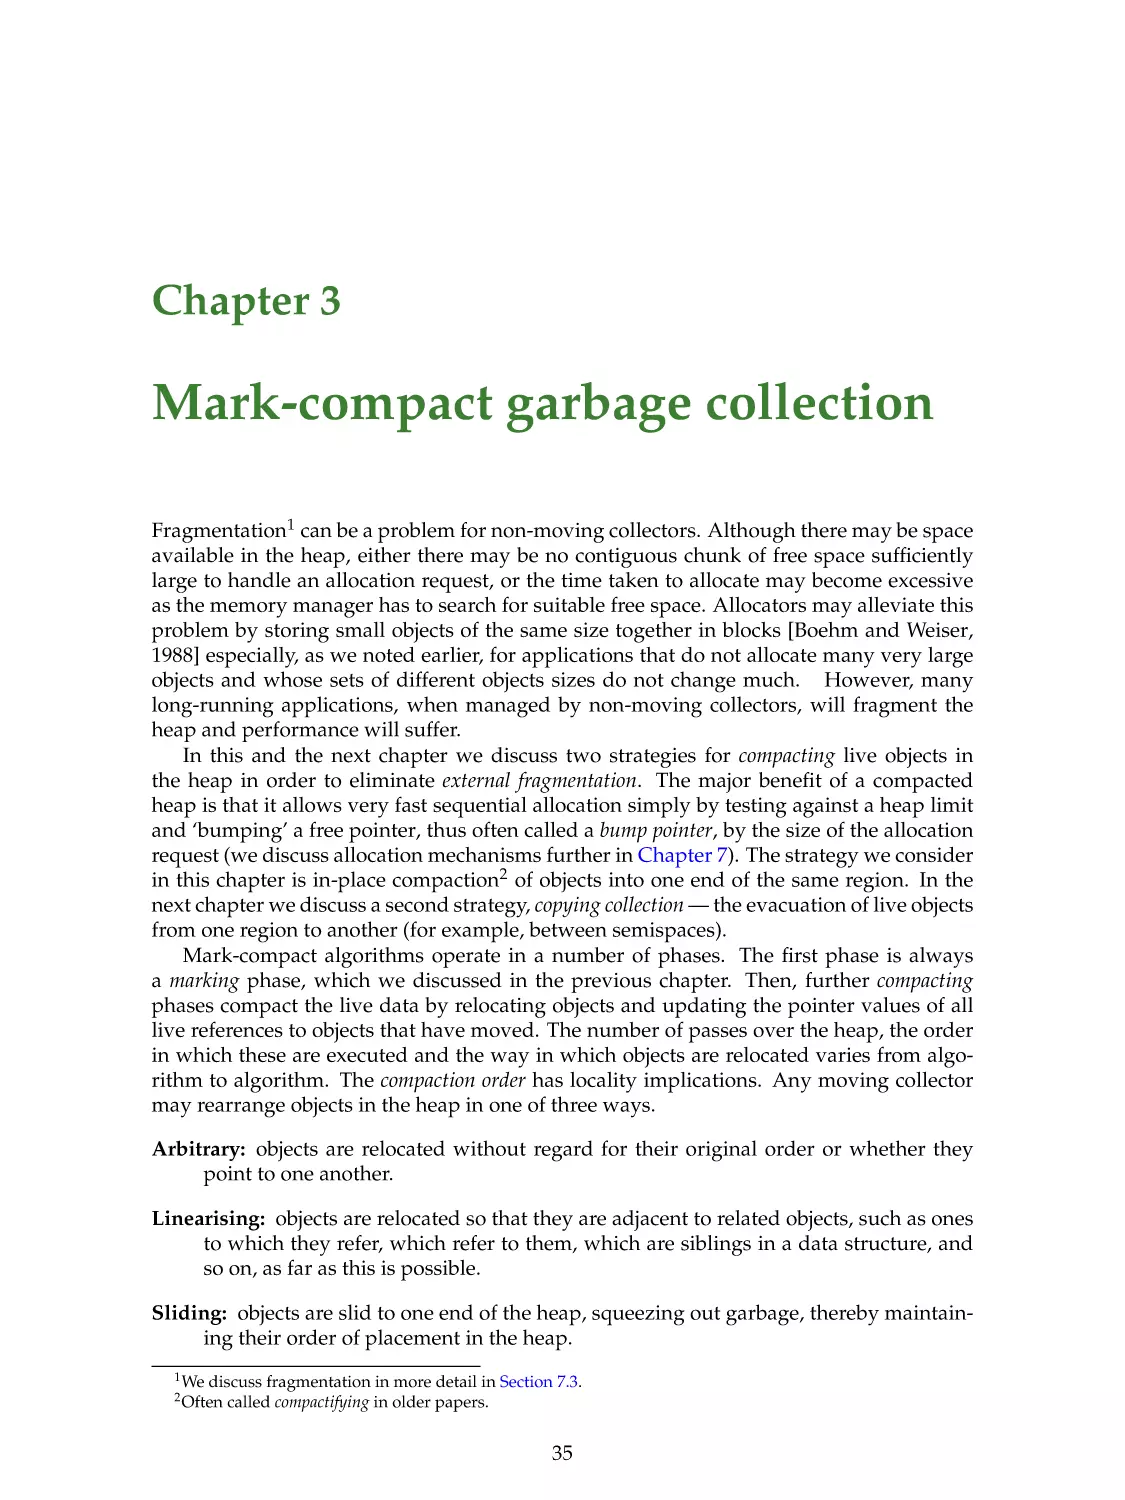 3. Mark-compact garbage collection